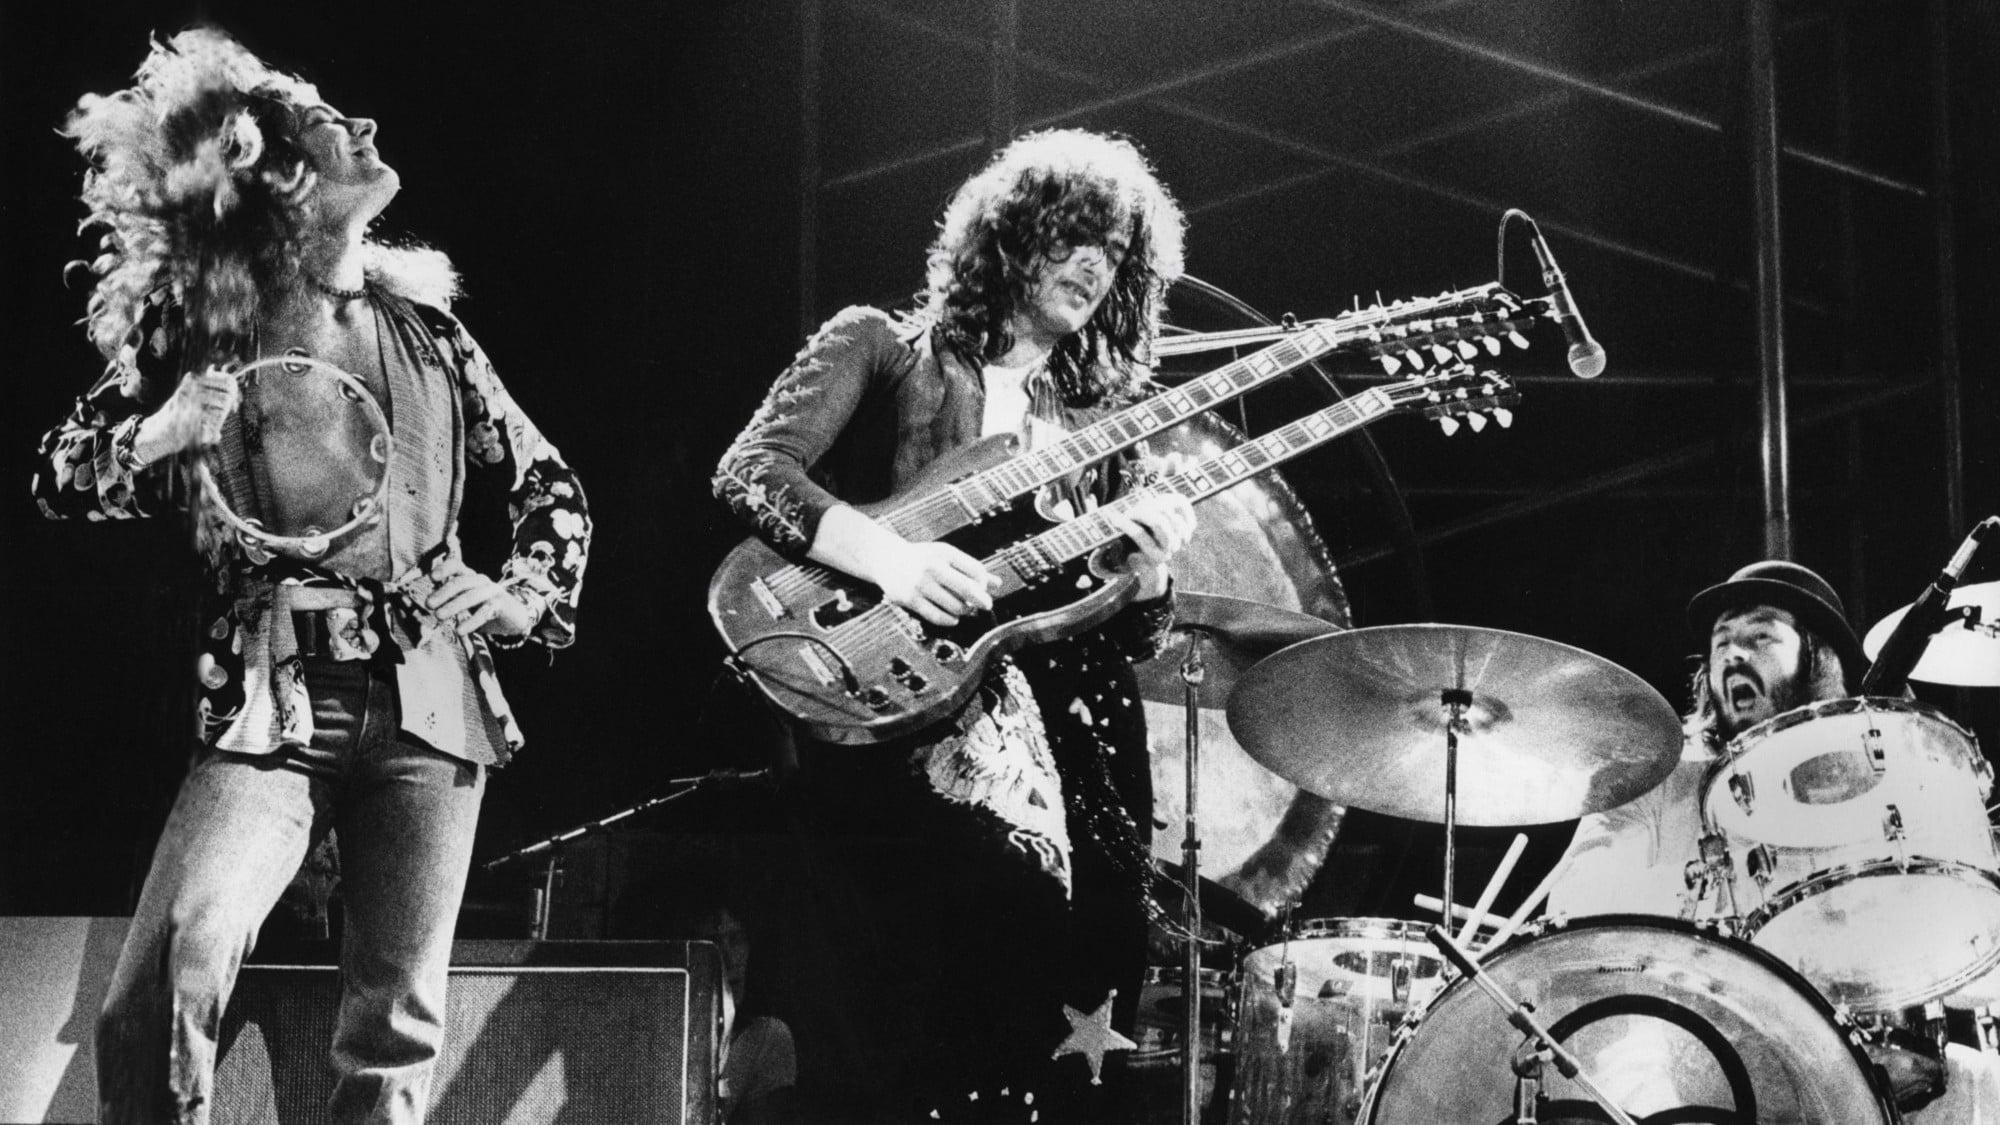 Jimmy Page and Robert Plant: Live at Irvine Meadows backdrop